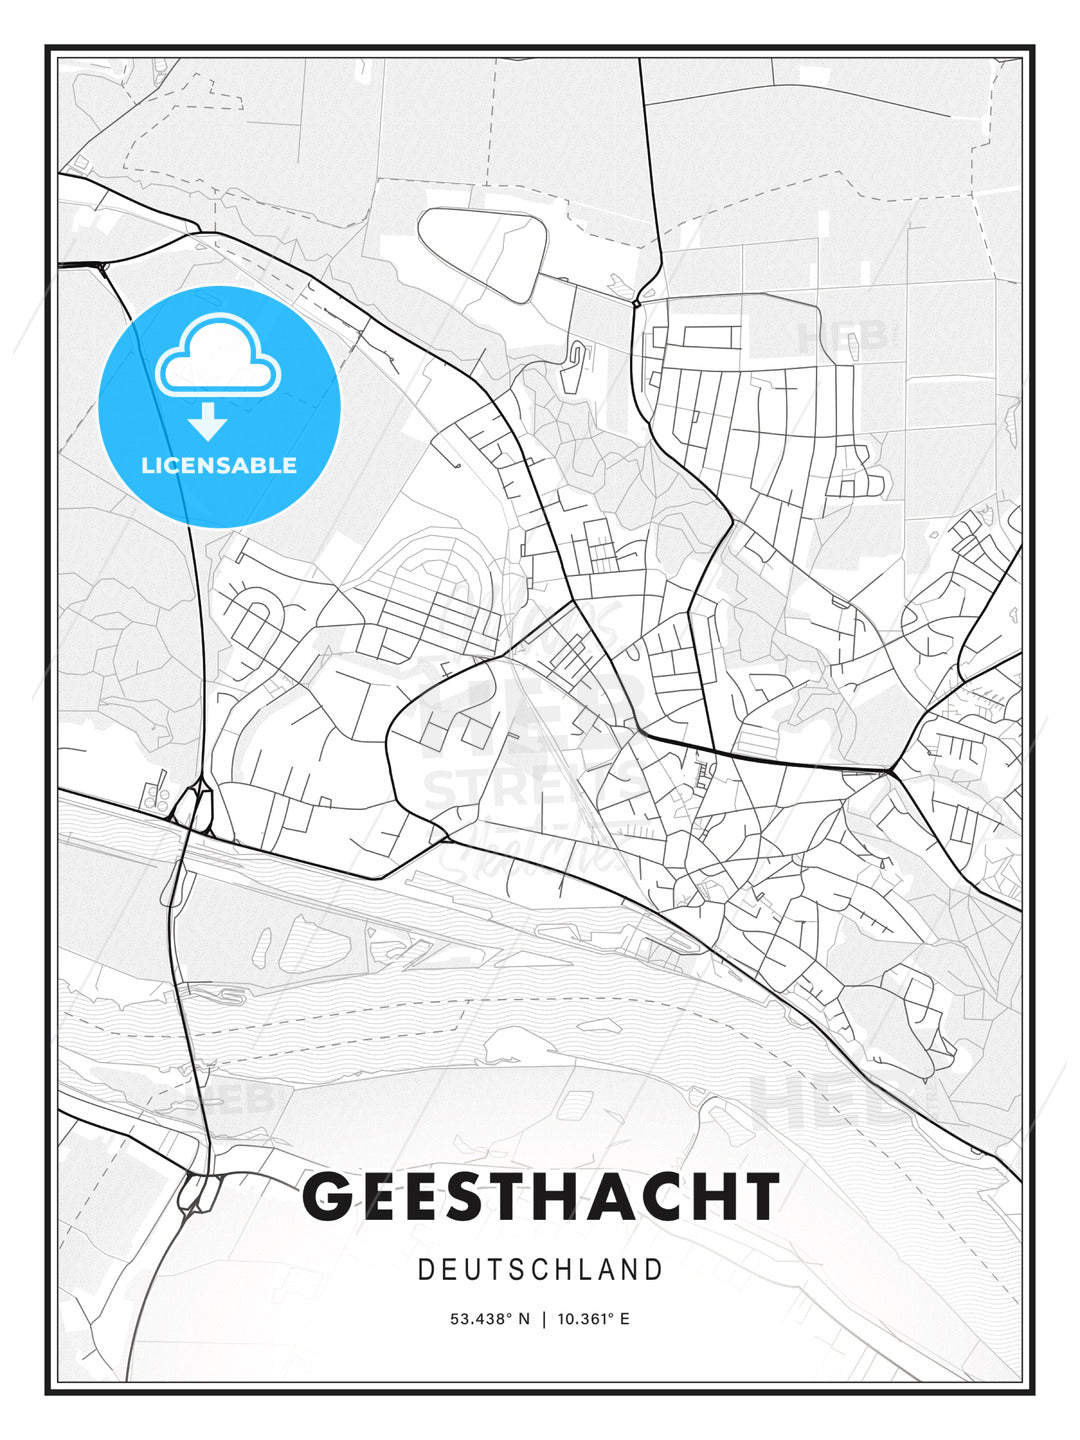 Geesthacht, Germany, Modern Print Template in Various Formats - HEBSTREITS Sketches